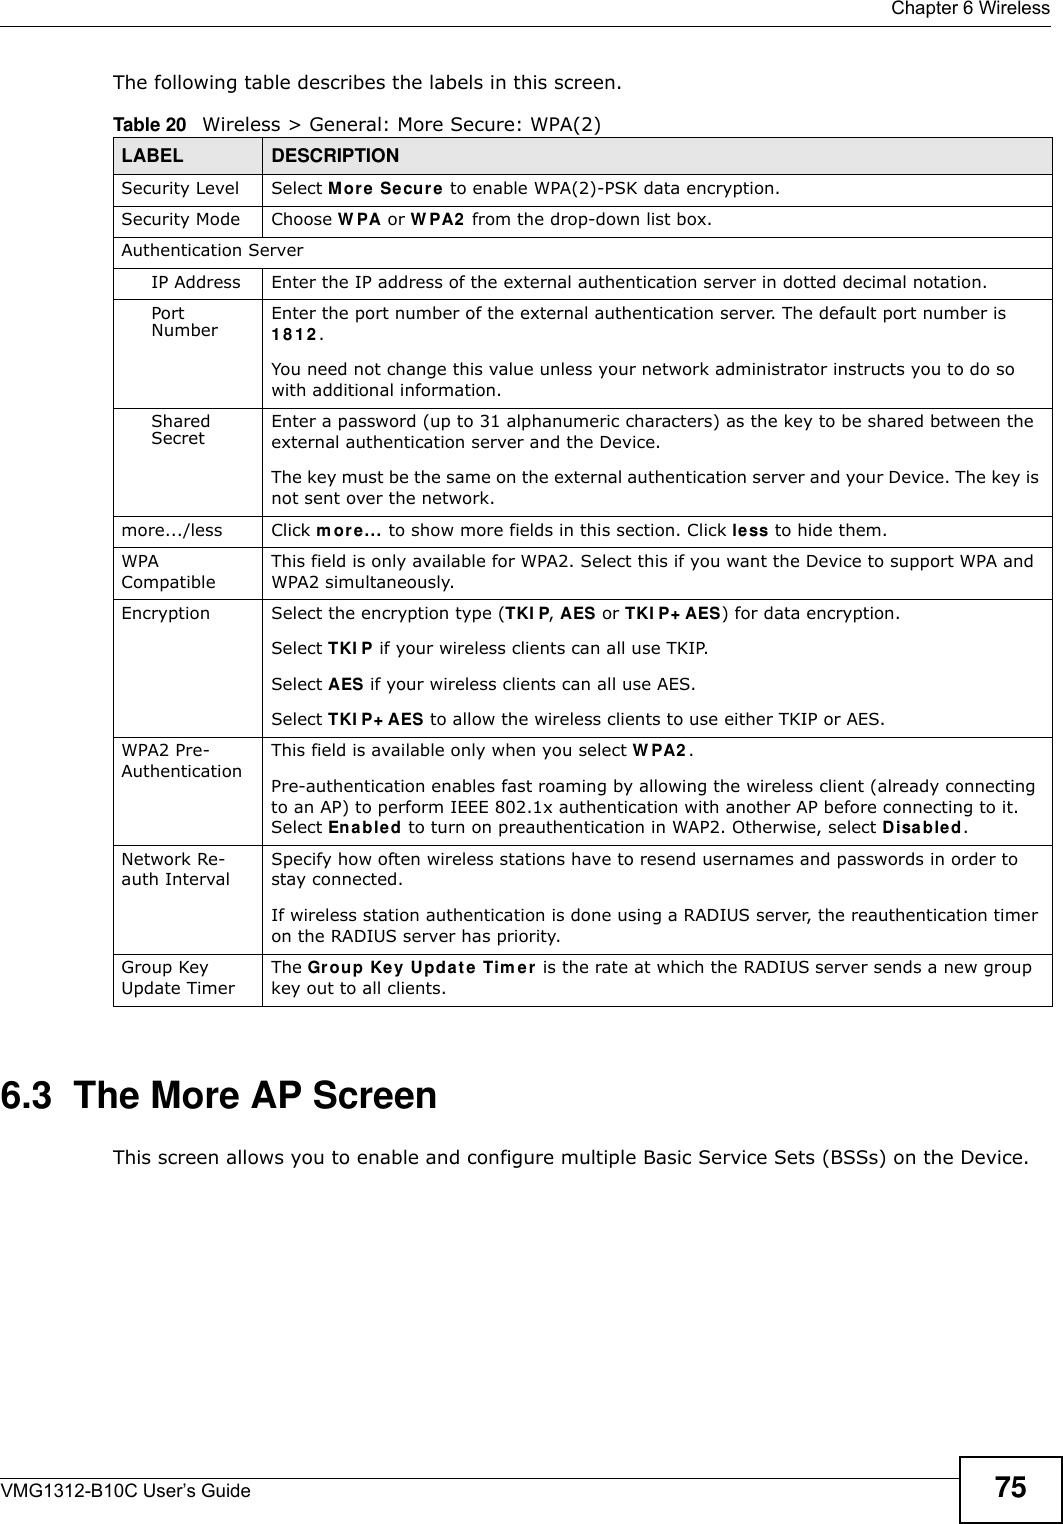  Chapter 6 WirelessVMG1312-B10C User’s Guide 75The following table describes the labels in this screen.6.3  The More AP ScreenThis screen allows you to enable and configure multiple Basic Service Sets (BSSs) on the Device.Table 20   Wireless &gt; General: More Secure: WPA(2)LABEL DESCRIPTIONSecurity Level Select Mor e  Se cur e to enable WPA(2)-PSK data encryption.Security Mode Choose W PA or W PA2  from the drop-down list box.Authentication ServerIP Address Enter the IP address of the external authentication server in dotted decimal notation.Port Number Enter the port number of the external authentication server. The default port number is 1 8 1 2 . You need not change this value unless your network administrator instructs you to do so with additional information. Shared Secret Enter a password (up to 31 alphanumeric characters) as the key to be shared between the external authentication server and the Device.The key must be the same on the external authentication server and your Device. The key is not sent over the network. more.../less Click m or e... to show more fields in this section. Click less to hide them.WPA CompatibleThis field is only available for WPA2. Select this if you want the Device to support WPA and WPA2 simultaneously.Encryption Select the encryption type (TKI P, AES or TKI P+ AES) for data encryption.Select TKI P if your wireless clients can all use TKIP.Select AES if your wireless clients can all use AES.Select TKI P+ AES to allow the wireless clients to use either TKIP or AES.WPA2 Pre-AuthenticationThis field is available only when you select W PA2 .Pre-authentication enables fast roaming by allowing the wireless client (already connecting to an AP) to perform IEEE 802.1x authentication with another AP before connecting to it. Select En able d to turn on preauthentication in WAP2. Otherwise, select Disabled.Network Re-auth IntervalSpecify how often wireless stations have to resend usernames and passwords in order to stay connected.If wireless station authentication is done using a RADIUS server, the reauthentication timer on the RADIUS server has priority.Group Key Update TimerThe Grou p Ke y Updat e Tim er  is the rate at which the RADIUS server sends a new group key out to all clients. 